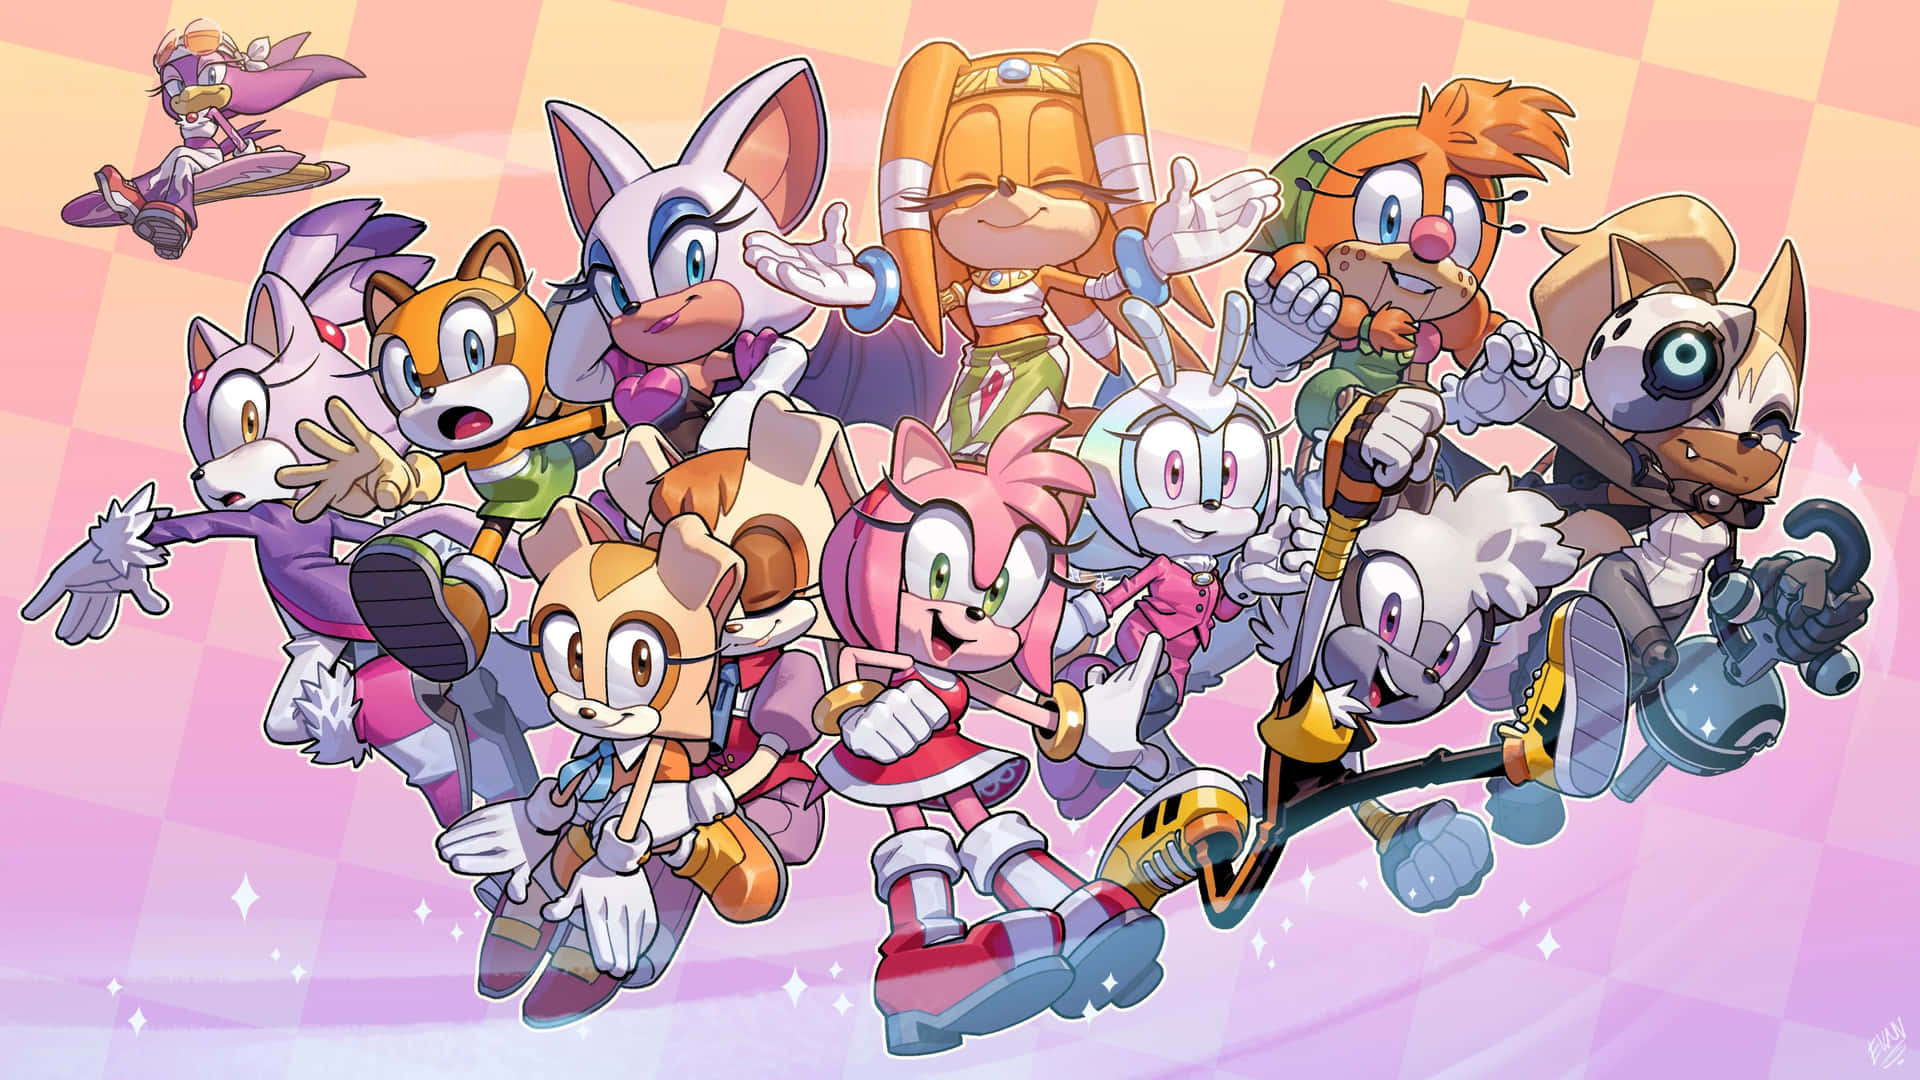 Characters From Sonic The Hedgehog Series Background Pictures Of All The Sonic  Characters Background Image And Wallpaper for Free Download